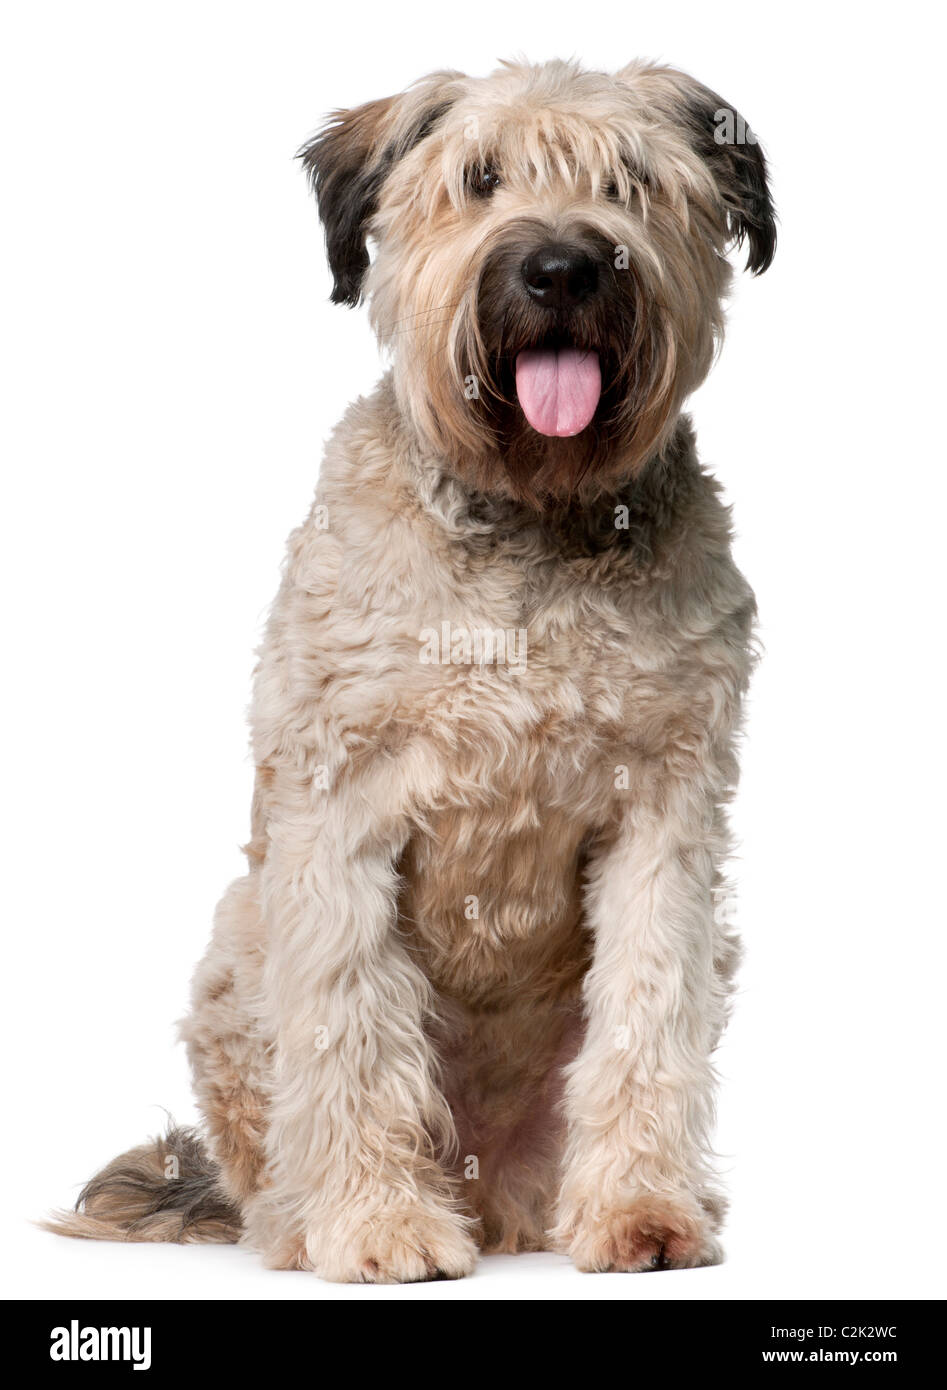 Bouvier des Flandres, 2 years old, sitting in front of white background Stock Photo